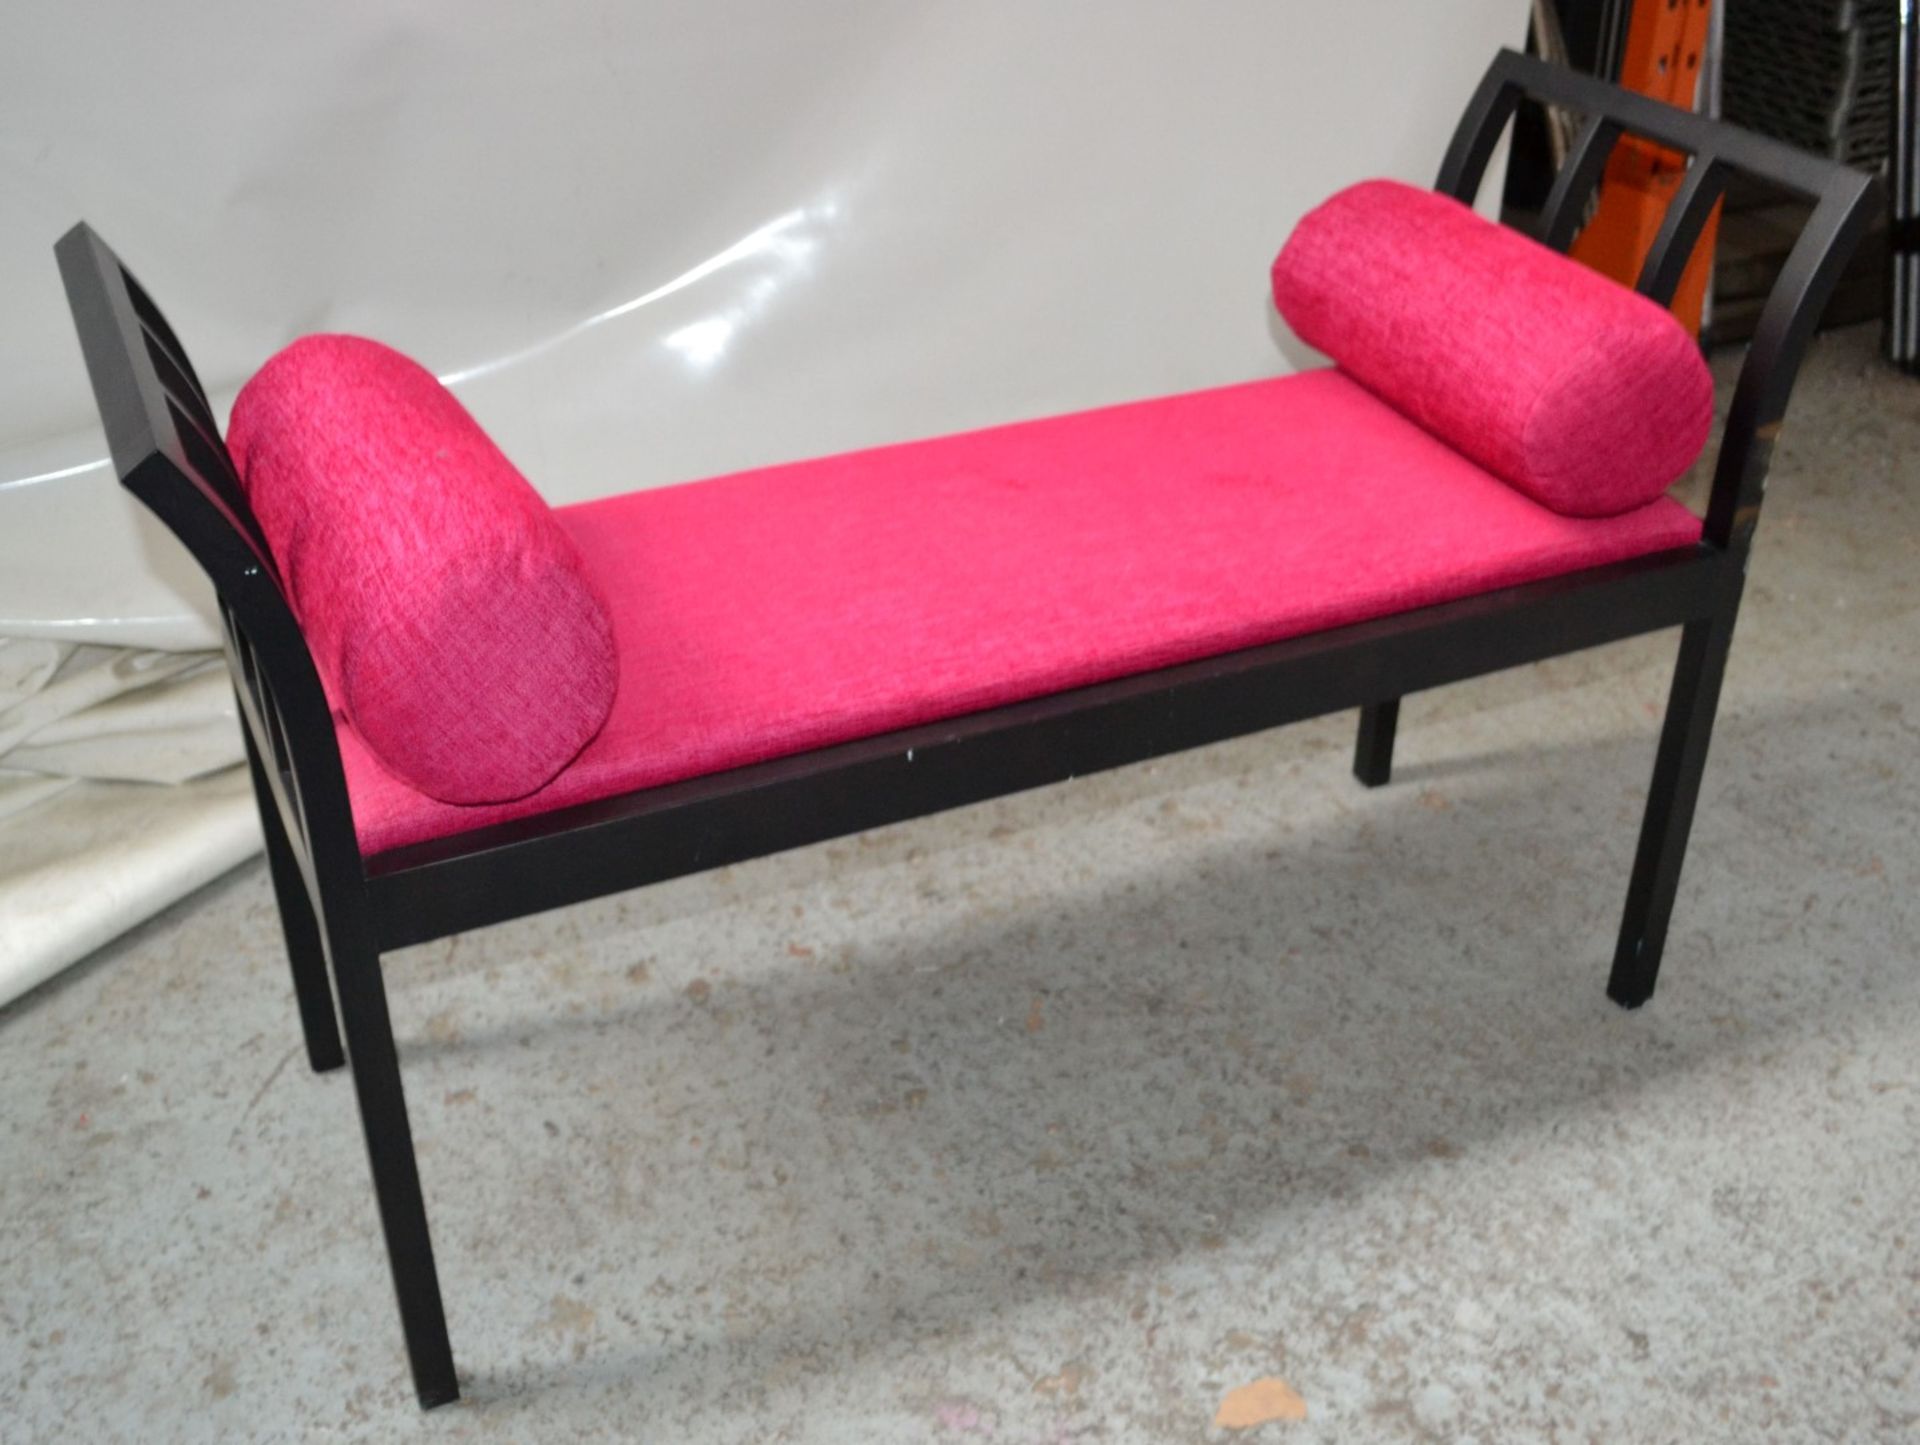 1 x Magenta Upholstered Bedroom Bench with 2 Cushions - CL314 - Location: Altrincham WA14 - *NO VAT - Image 6 of 11